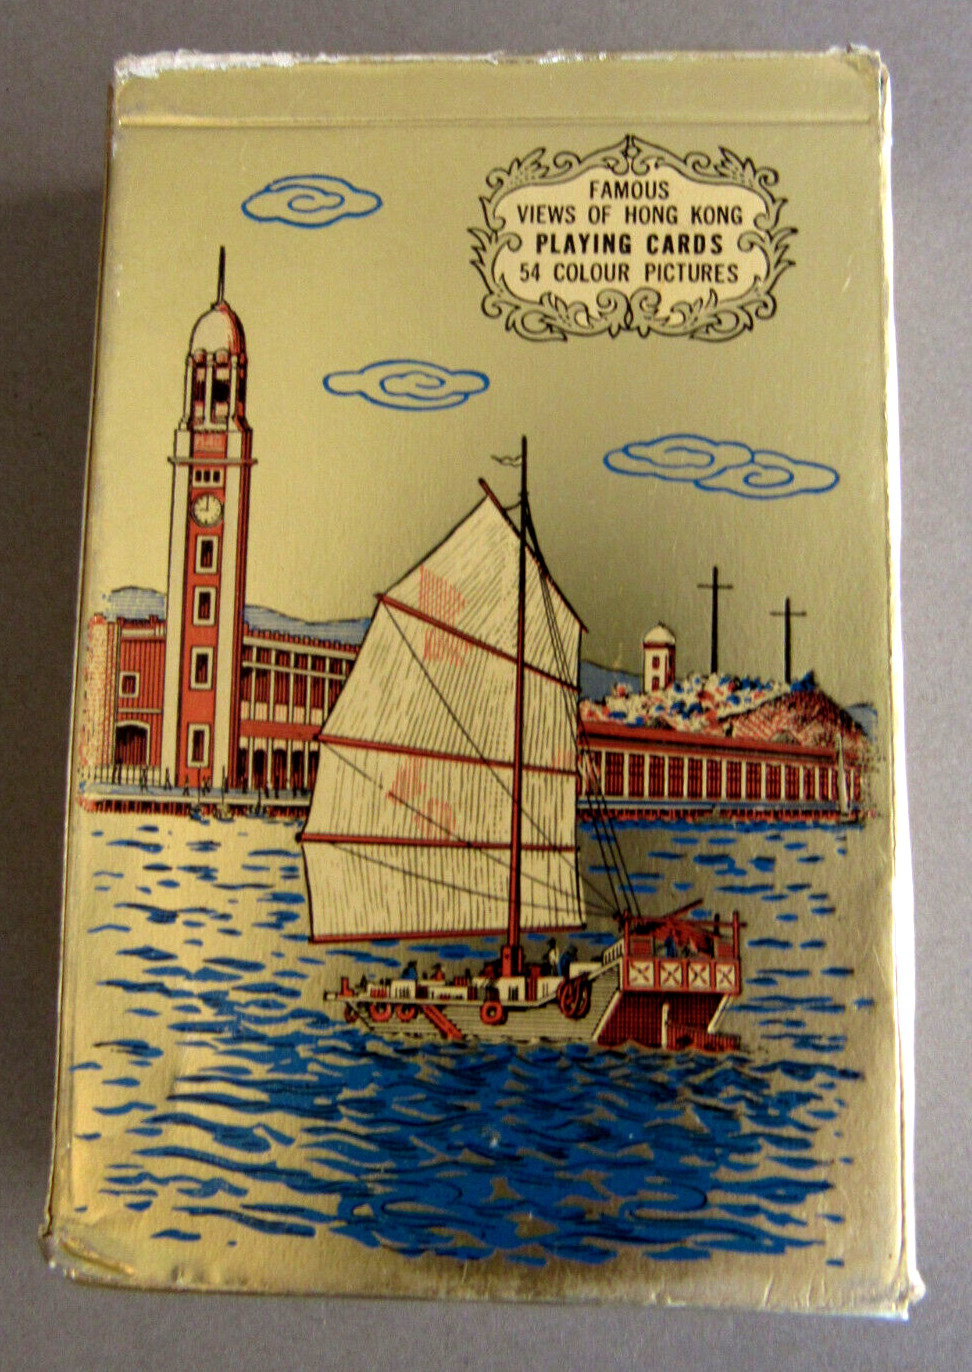 Vintage \'Famous Views of Hong Kong\' Playing Cards #505 - 54 Plastic Coated Cards